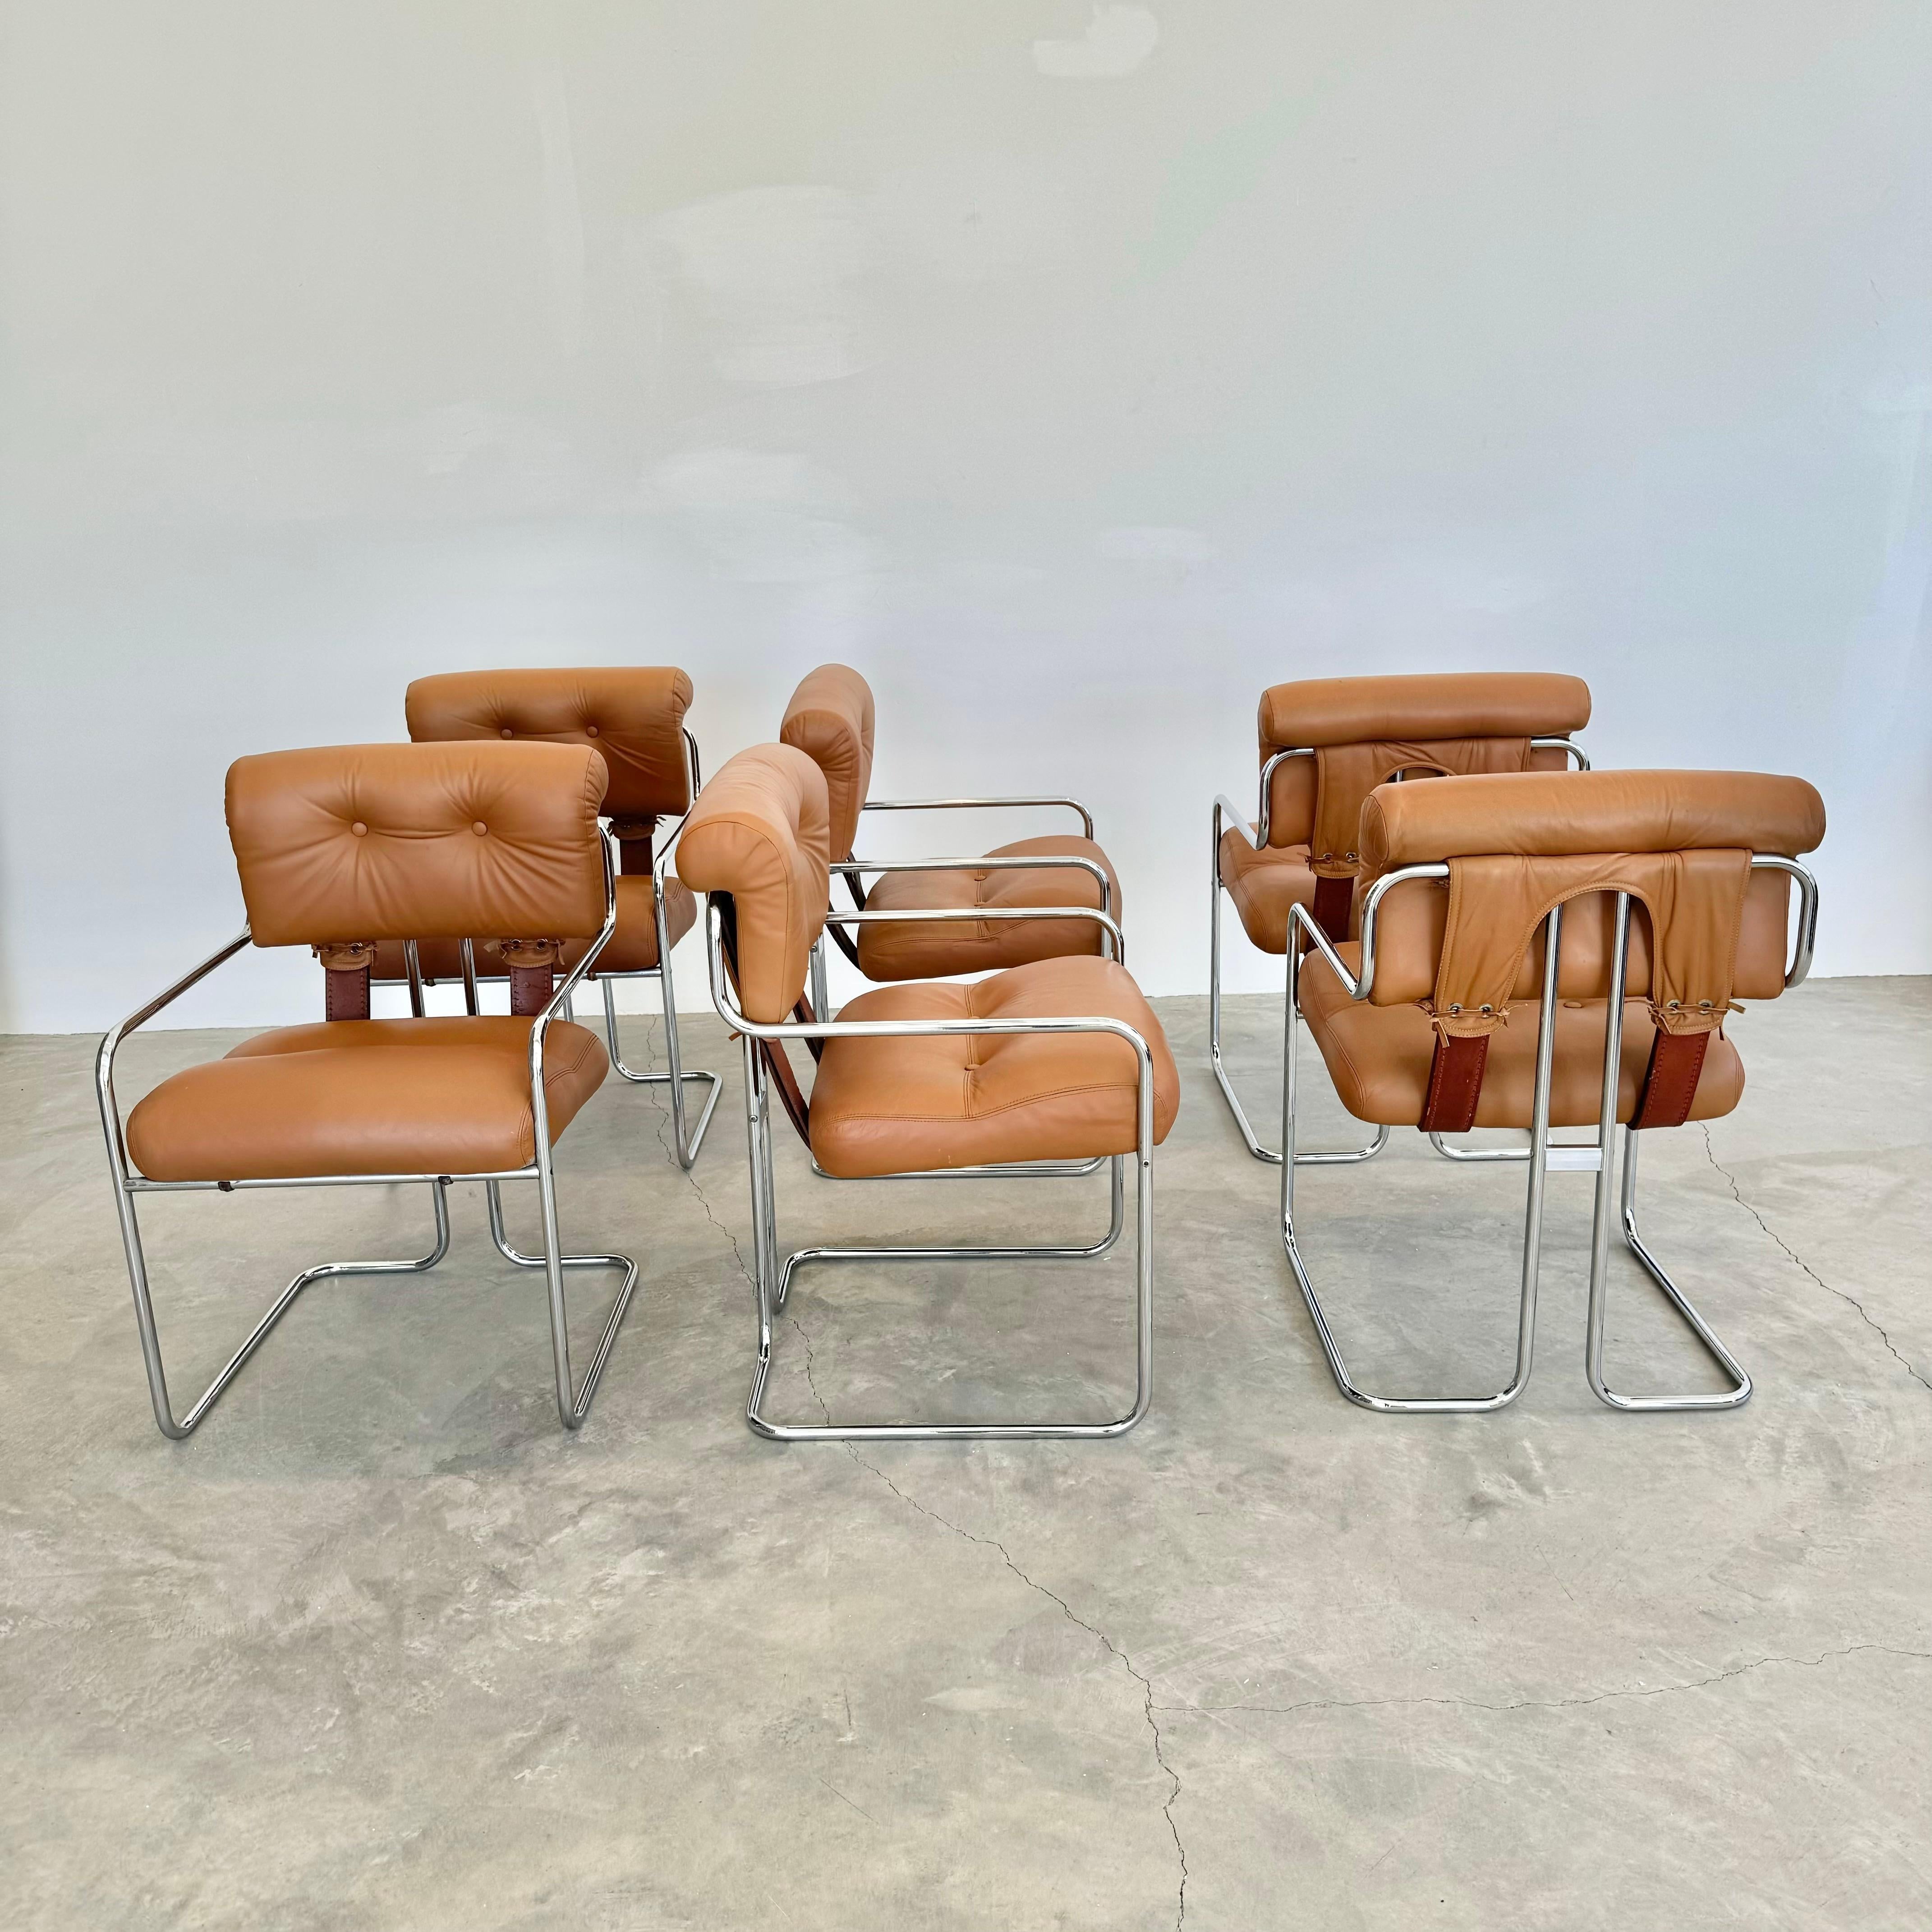 Set of 6 'Tucroma' Chairs in Tan by Guido Faleschini, 1970s Italy For Sale 8